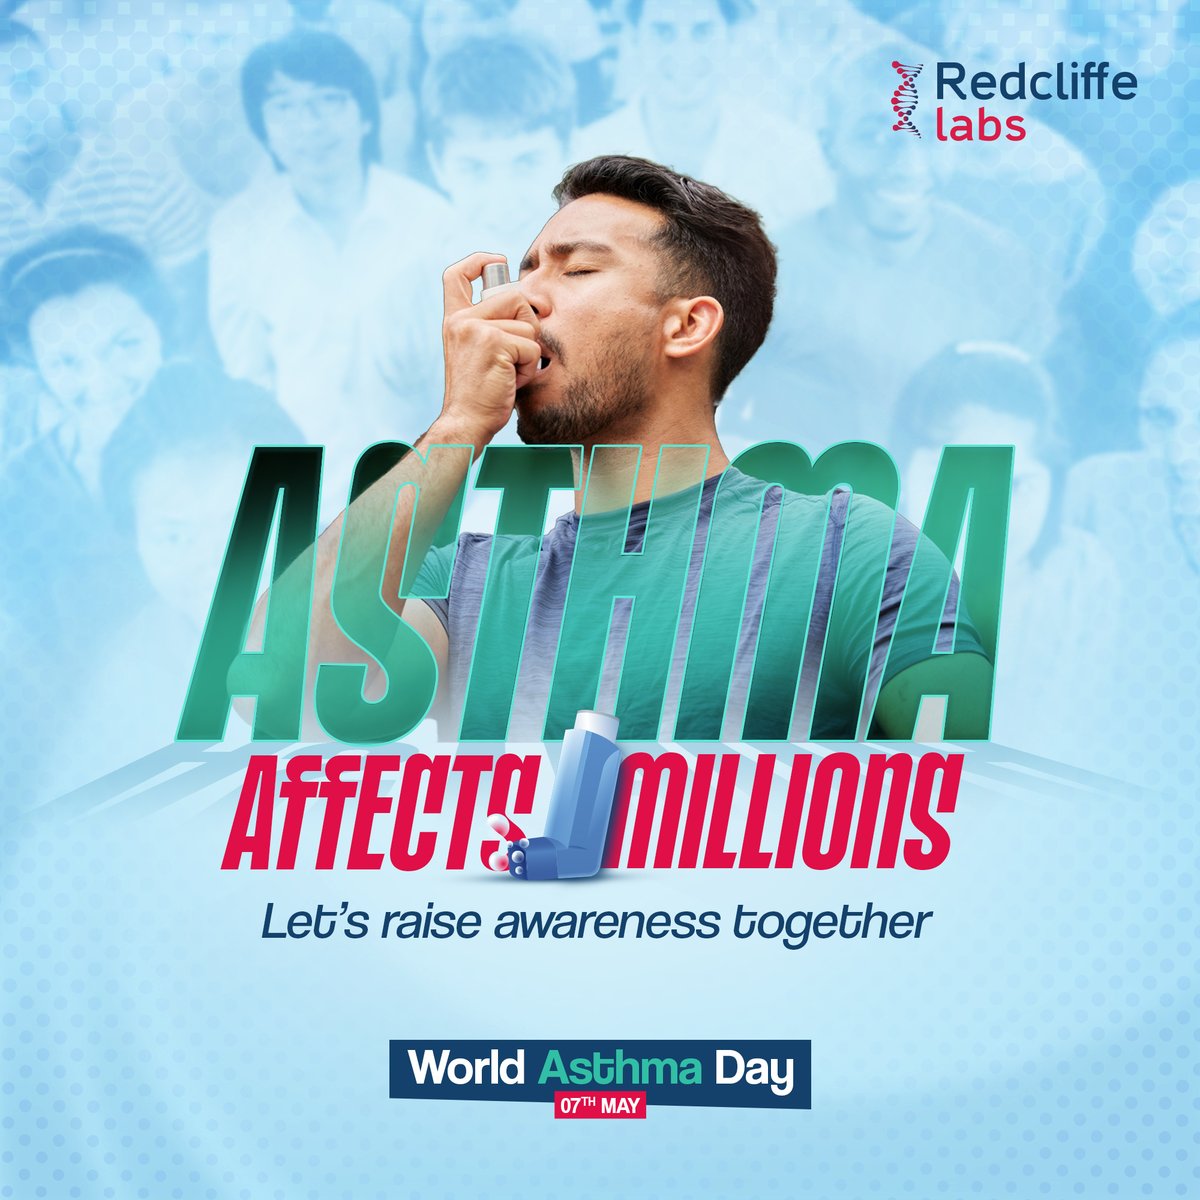 According to some studies, one in every ten asthmatics in the world are in India. And more than 80% of asthma cases in India are undiagnosed which if left untreated, can worsen over time. On World Asthma Day, let raise awareness about asthma that affects both children and adults.